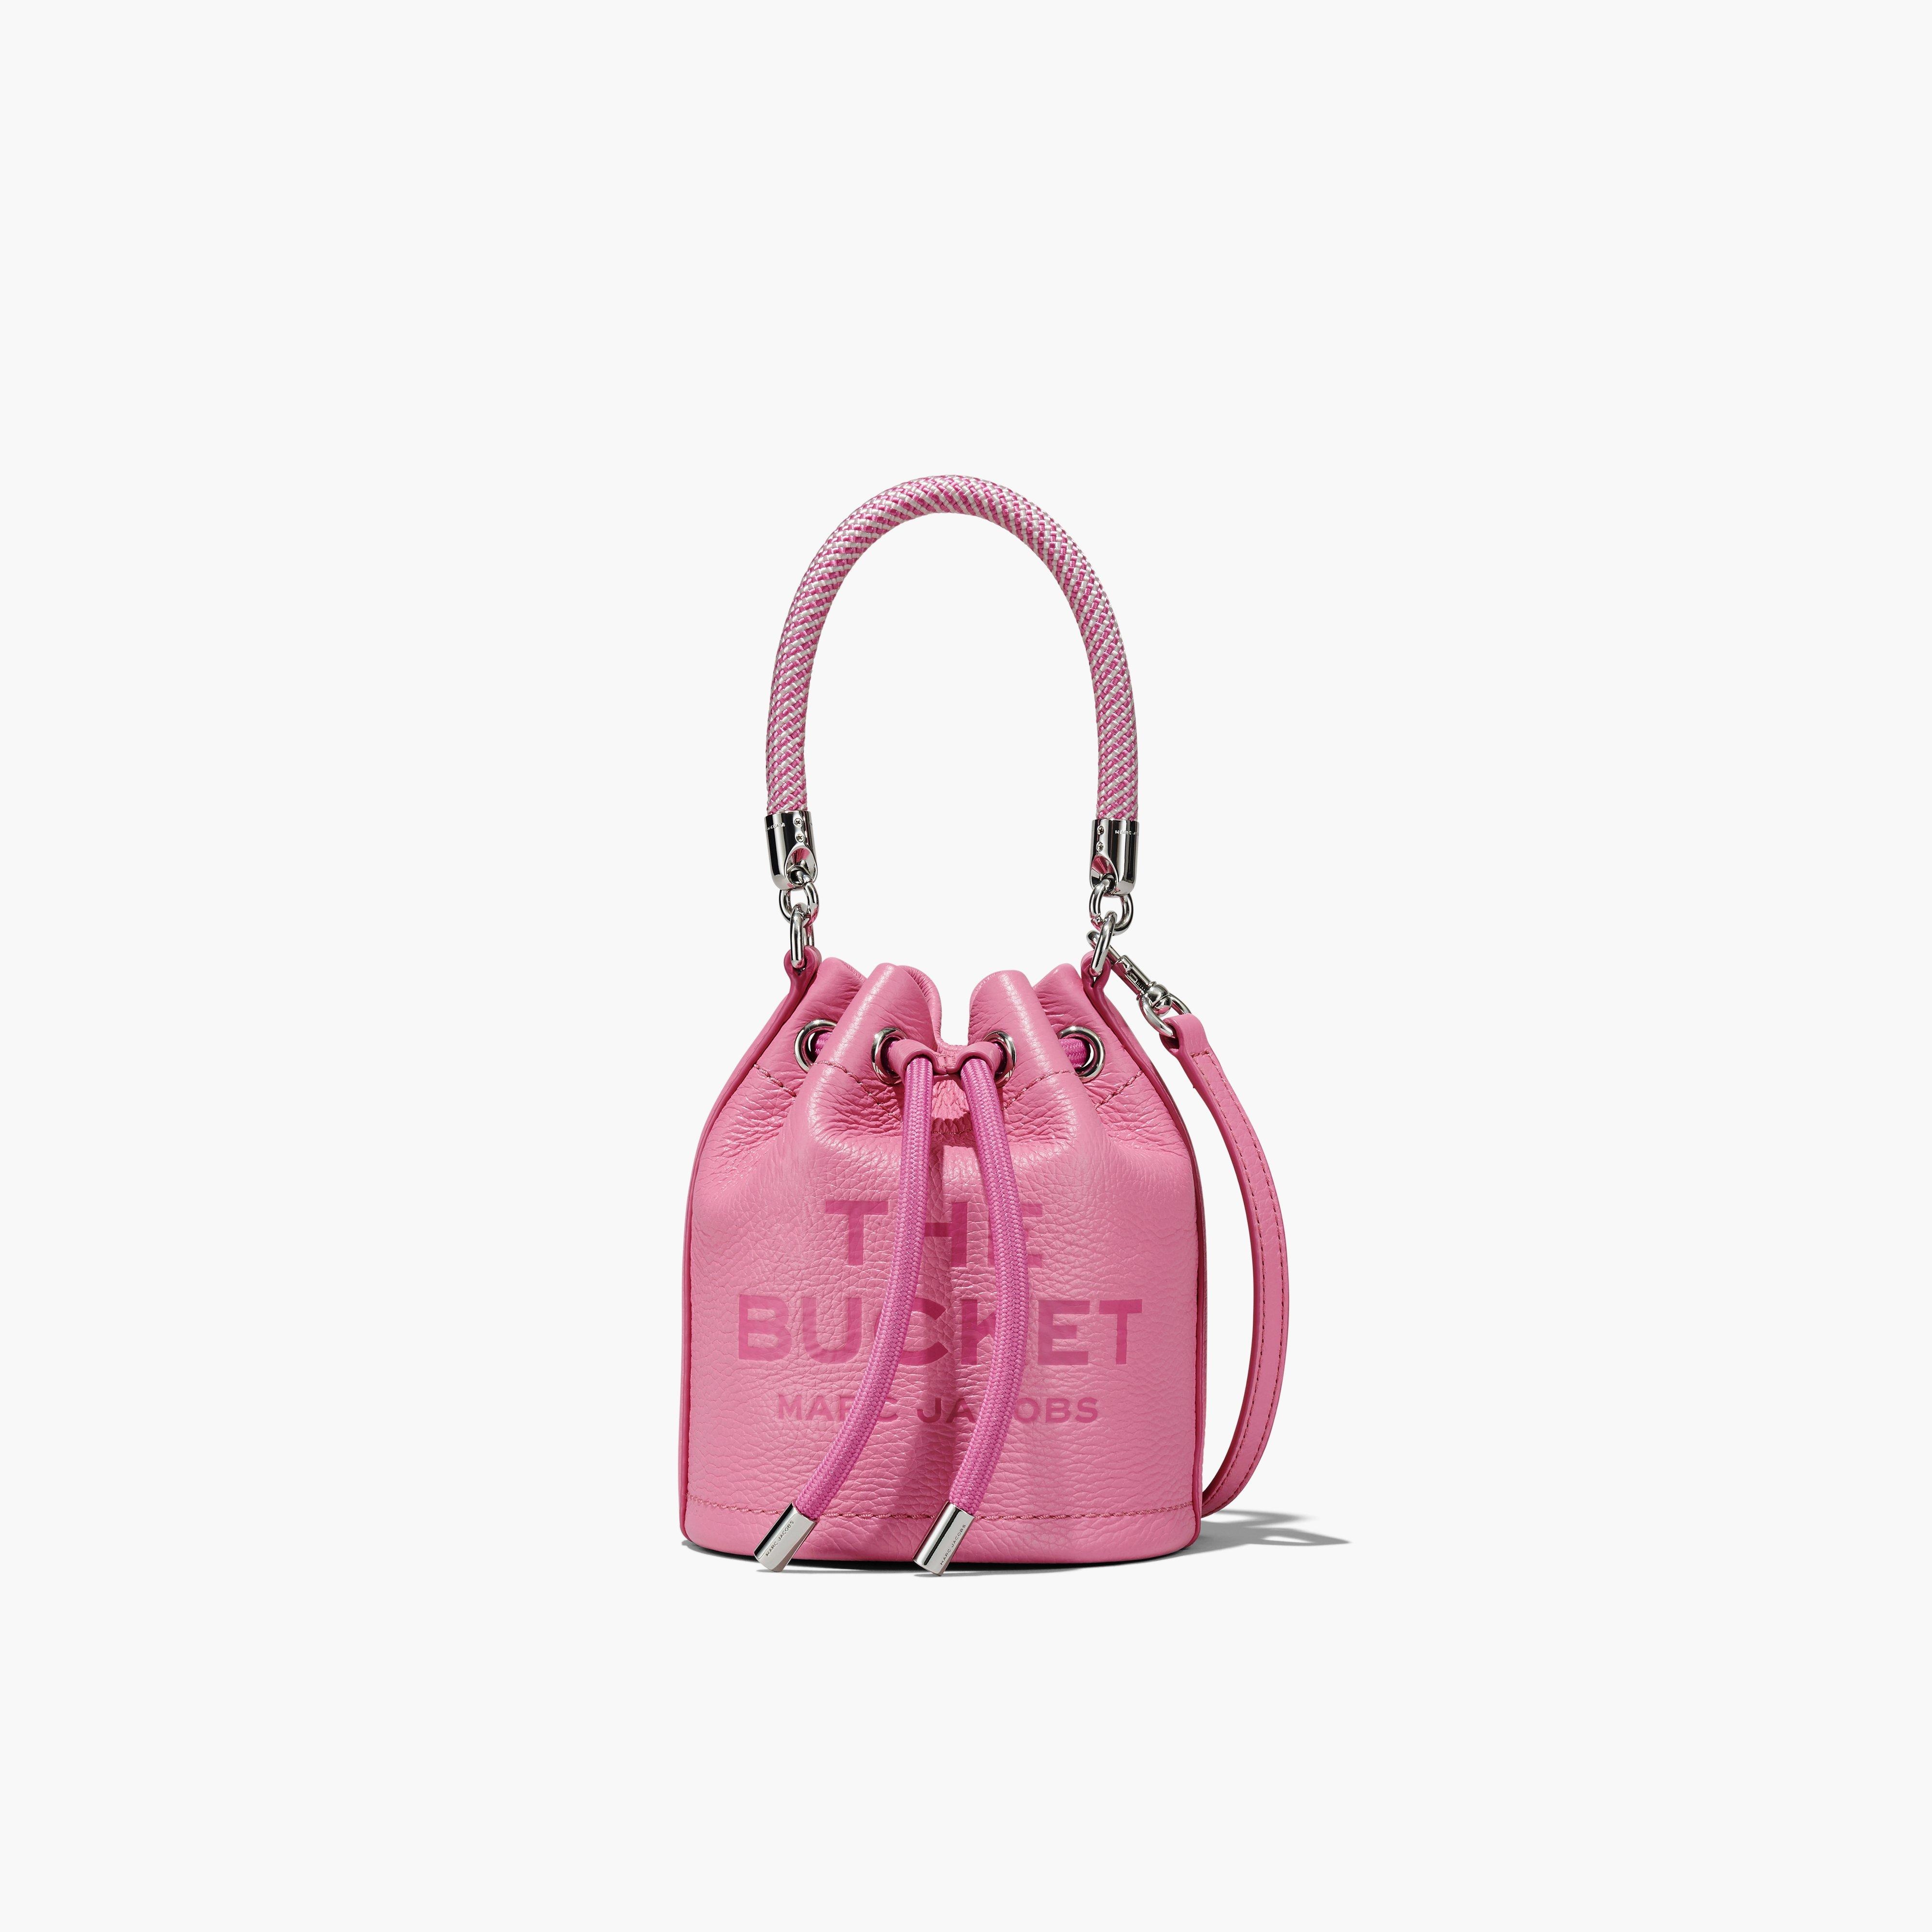 THE LEATHER MICRO BUCKET BAG - 1